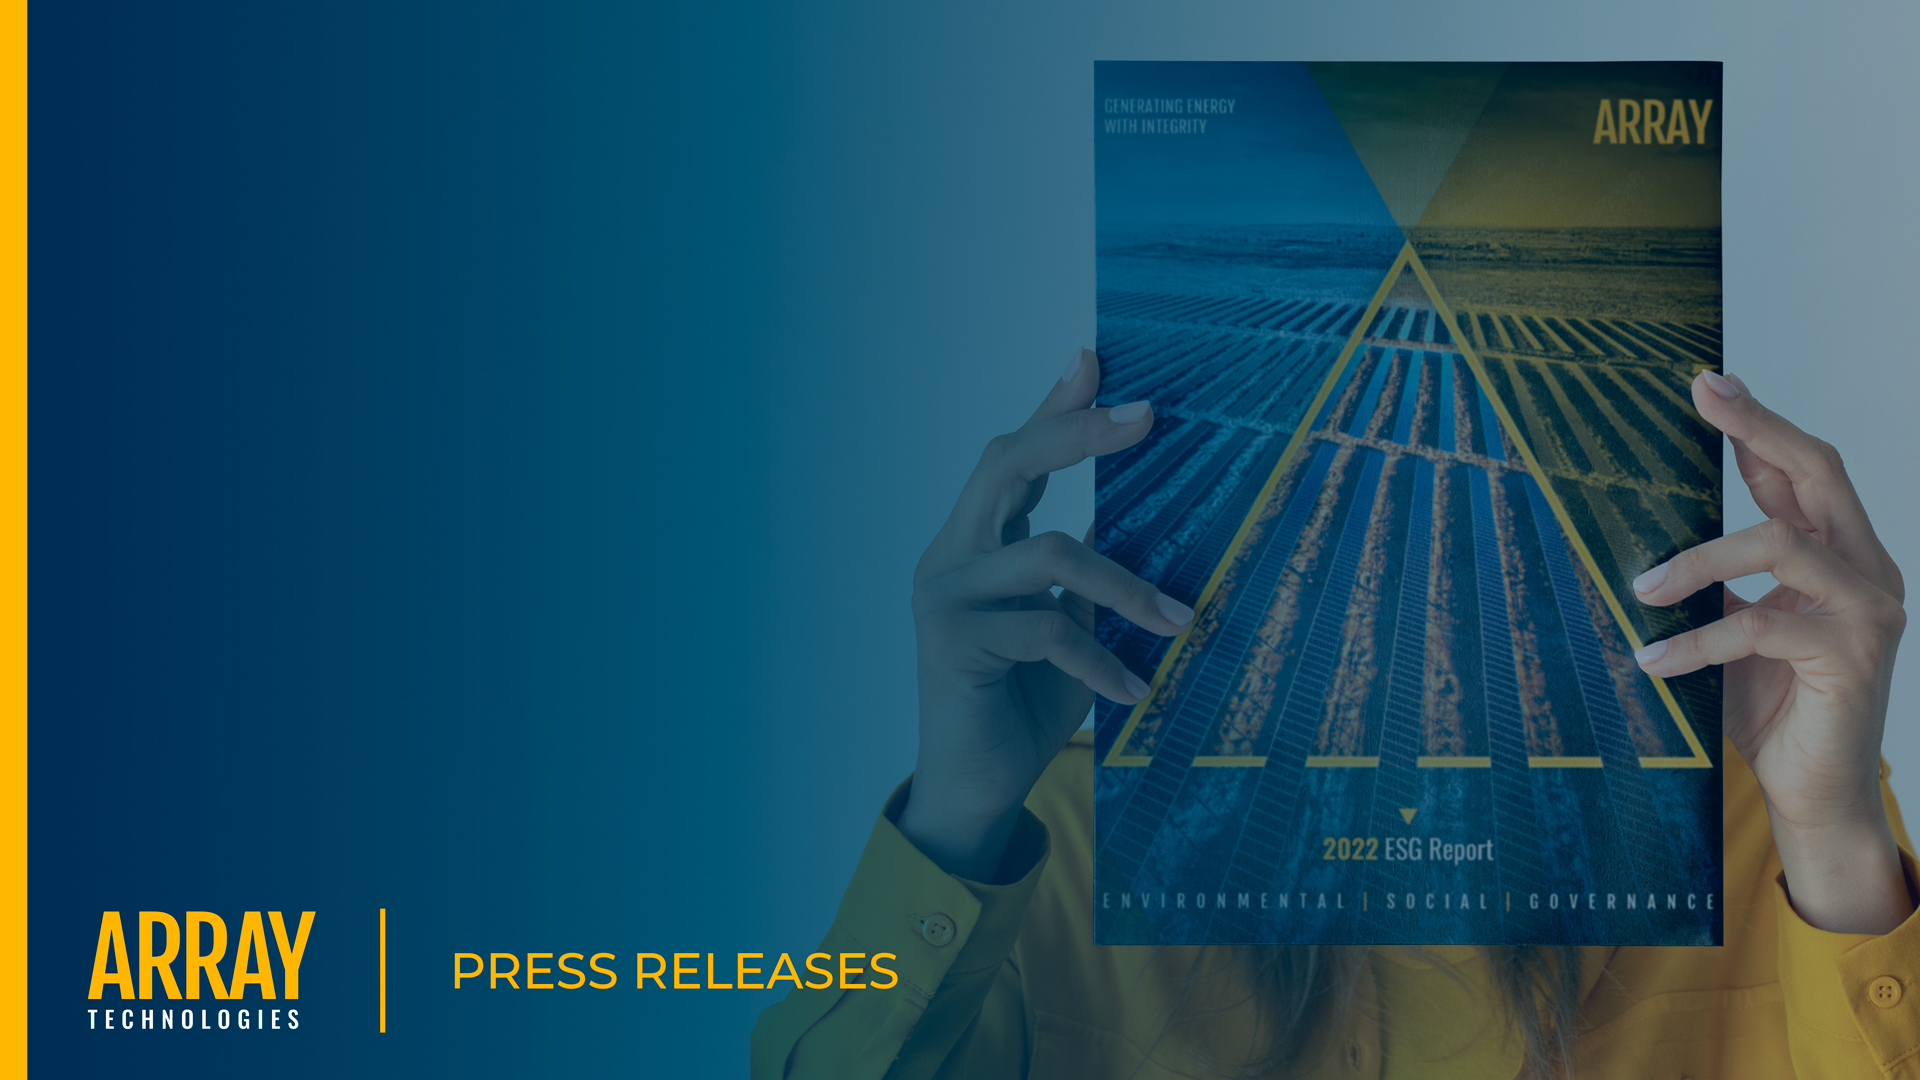 Press release photo announcing Array Technologies has published their Environmental, Social, and Governance (ESG) report is now available to view